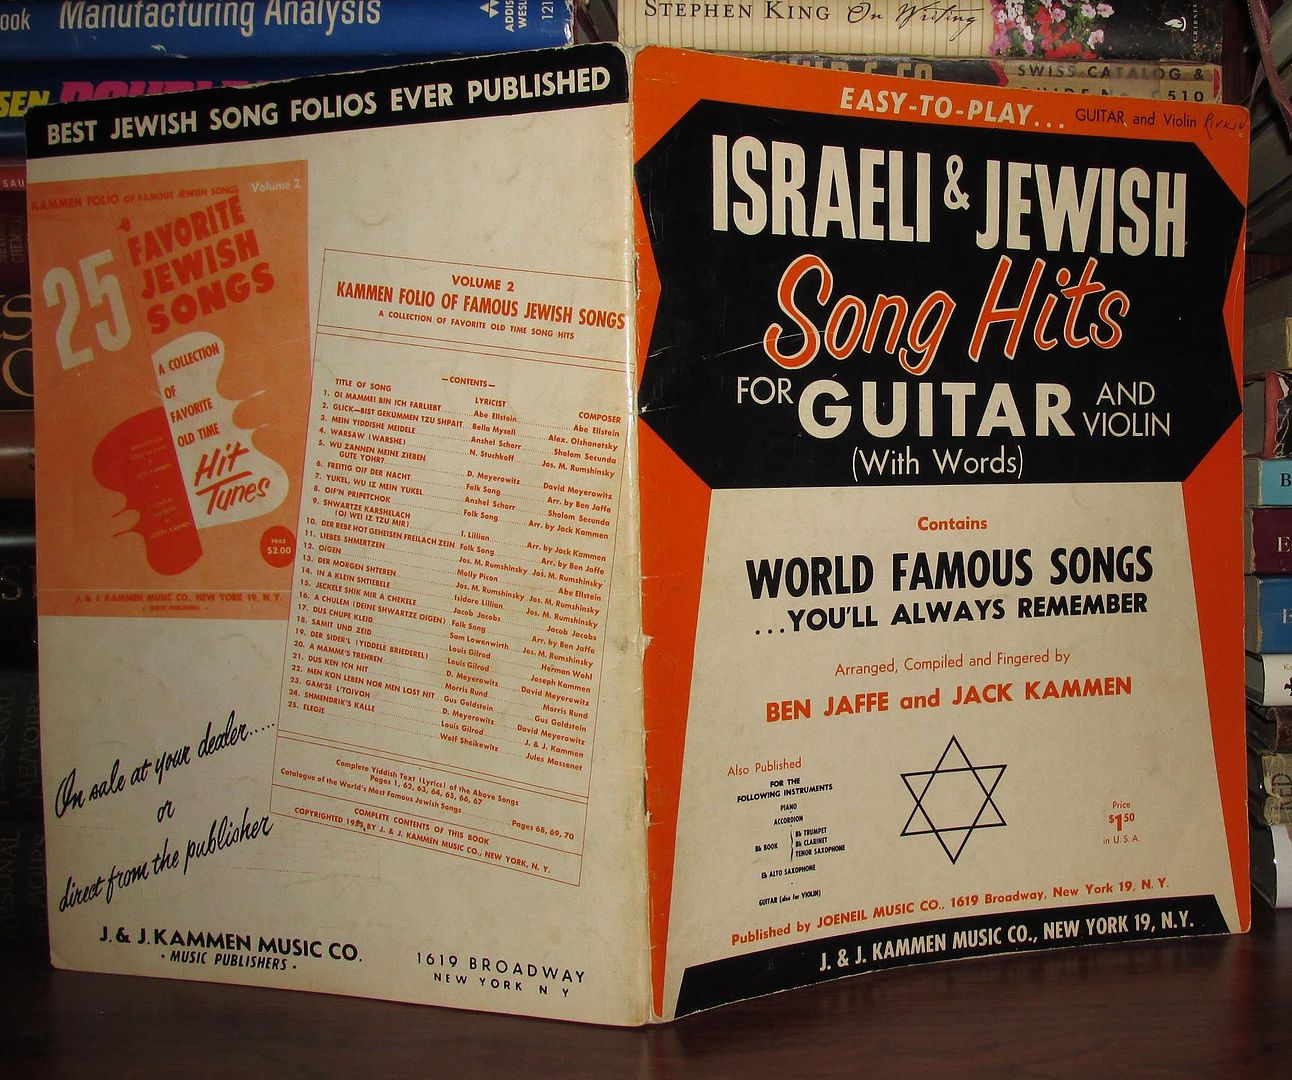 JAFFE, BEN AND JACK KAMMEN - Israeli & Jewish Song Hits for Guitar and Violin